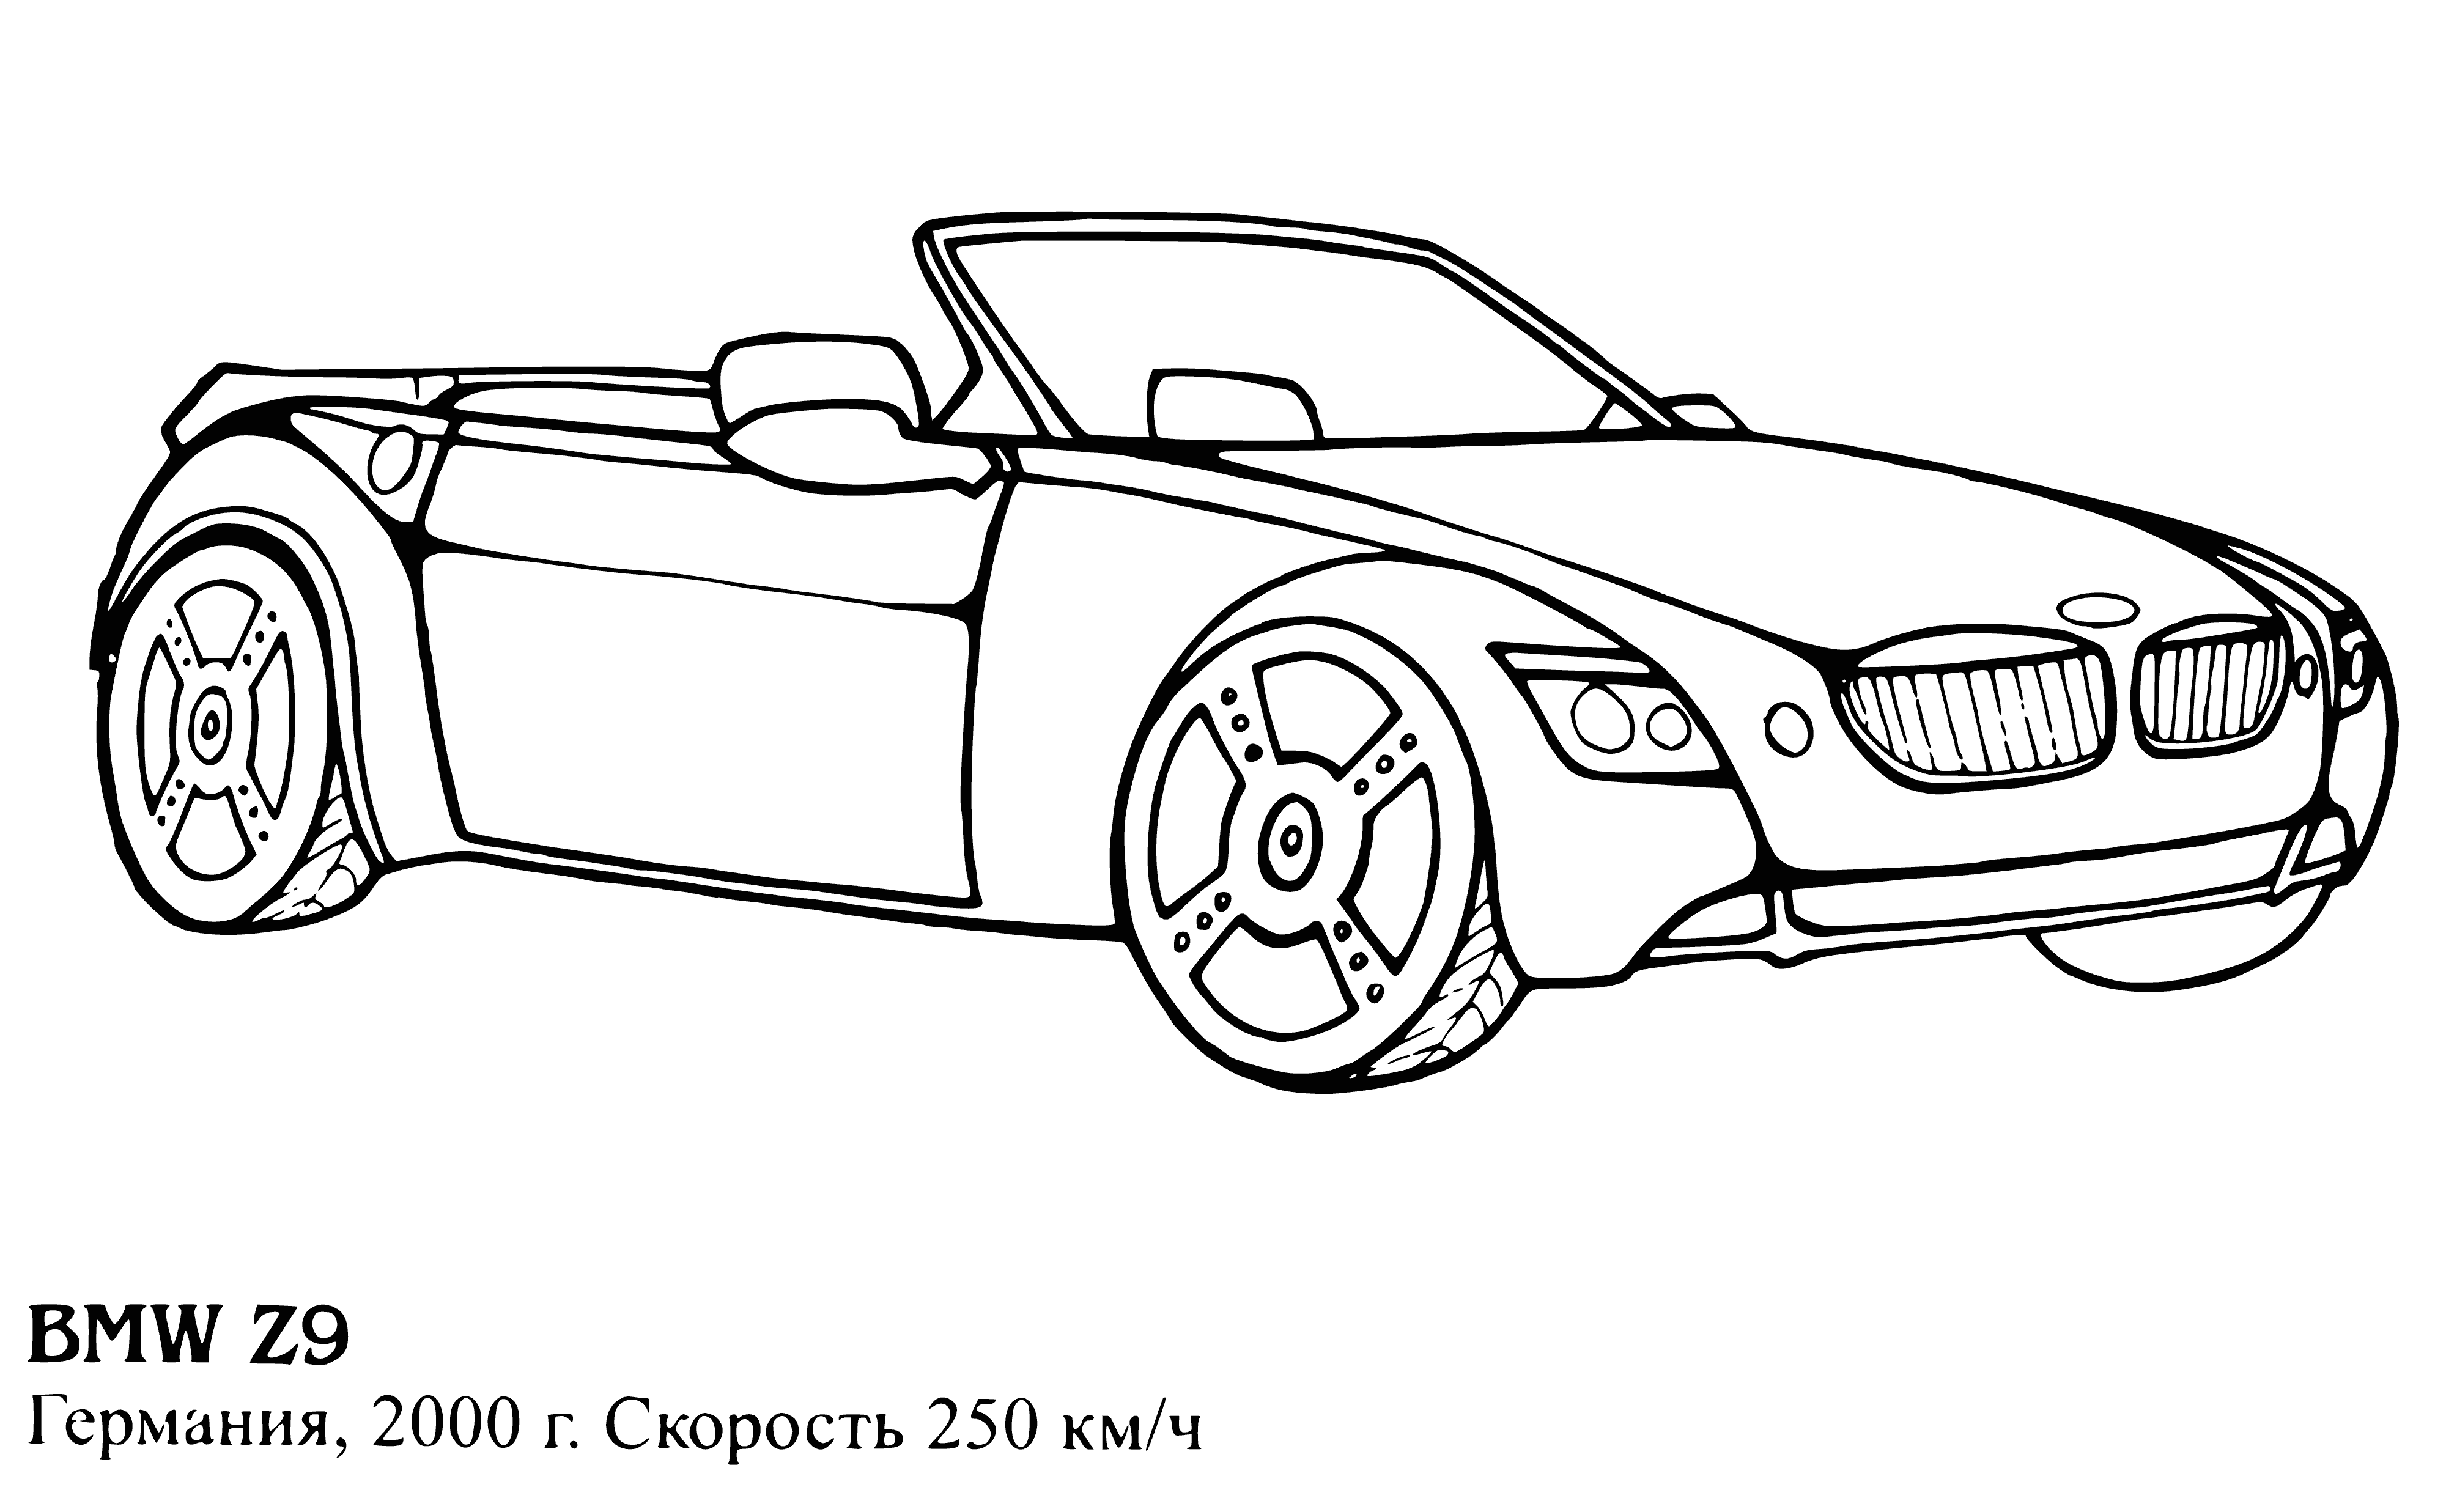 coloring page: The BMW Z9 is a 1999 concept car with an aggressive look, 4.4L V8, 300hp, 6-speed manual, limited-slip diff, 155mph top speed and 0-60 in 5.2s.